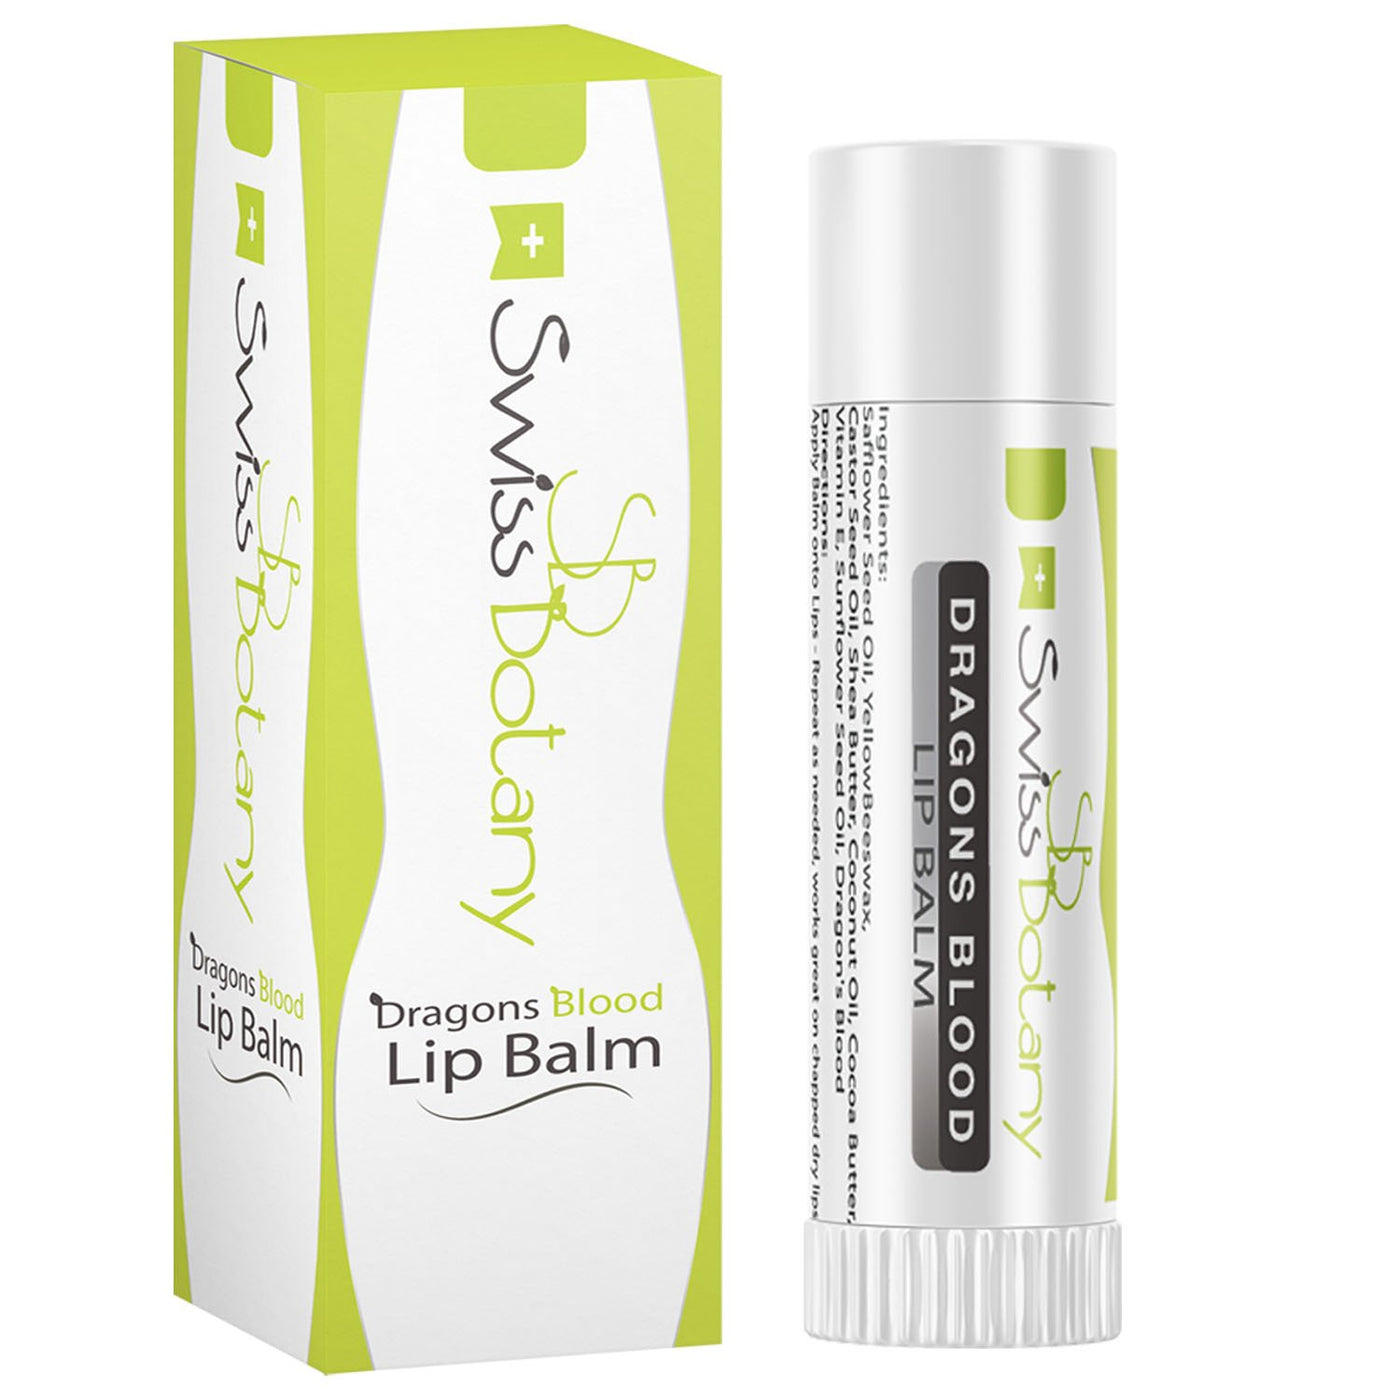 swissbotany Beauty Intense Lip Balm Dragons Blood Genuine Hydrating Lip Plumper for the Moisturized fuller Pouty Lips you've been craving!